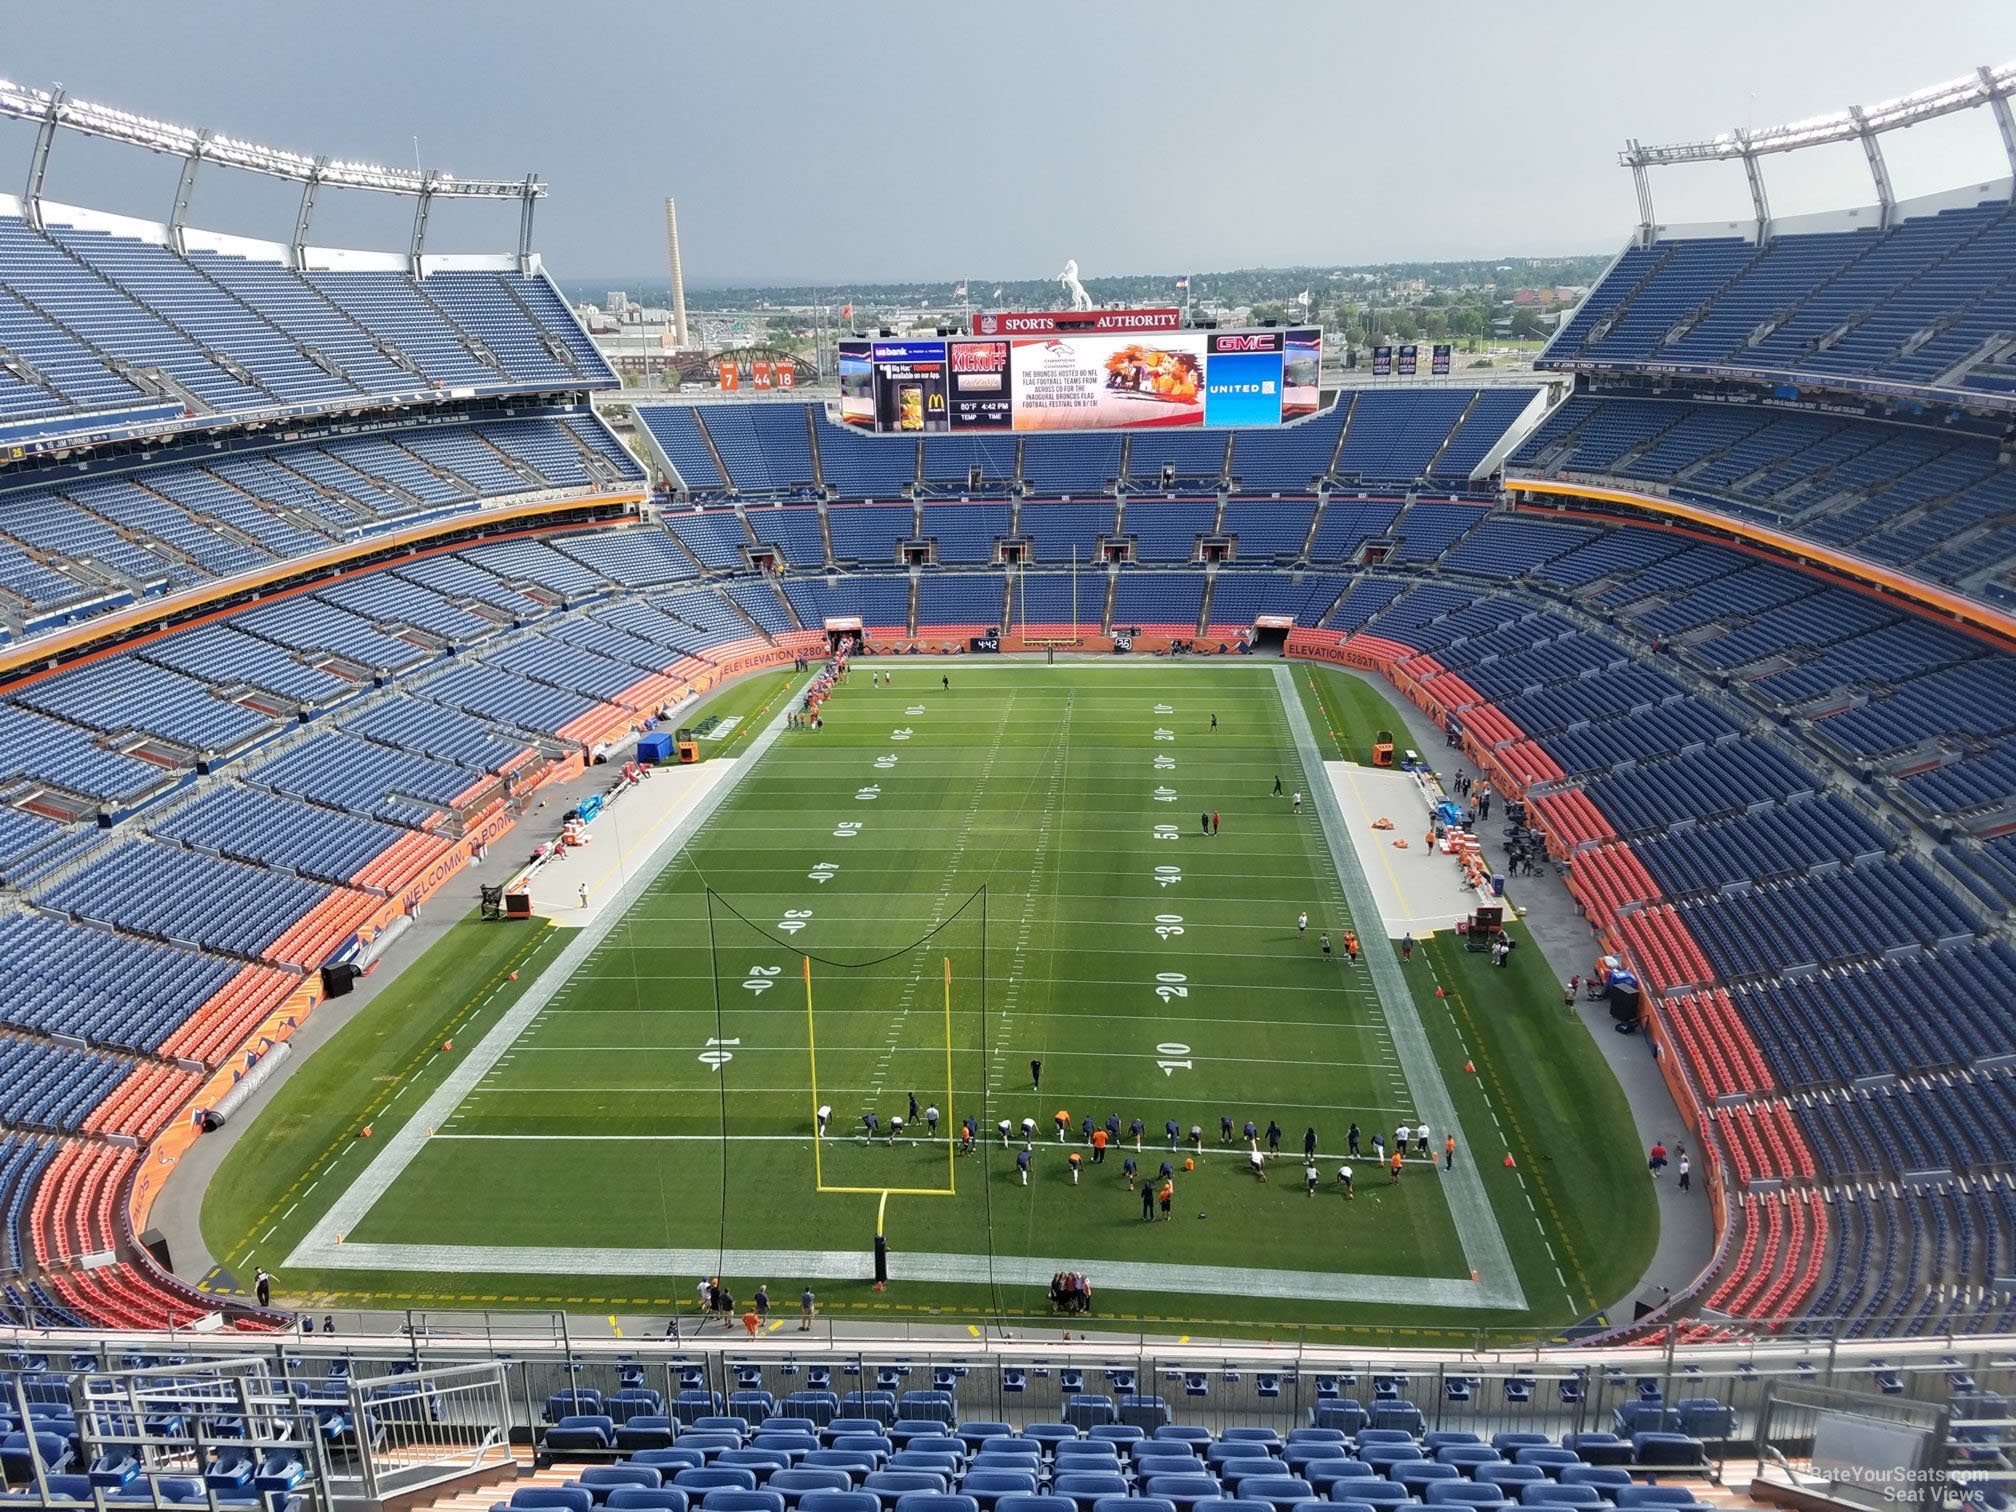 section 520, row 16 seat view  - empower field (at mile high)